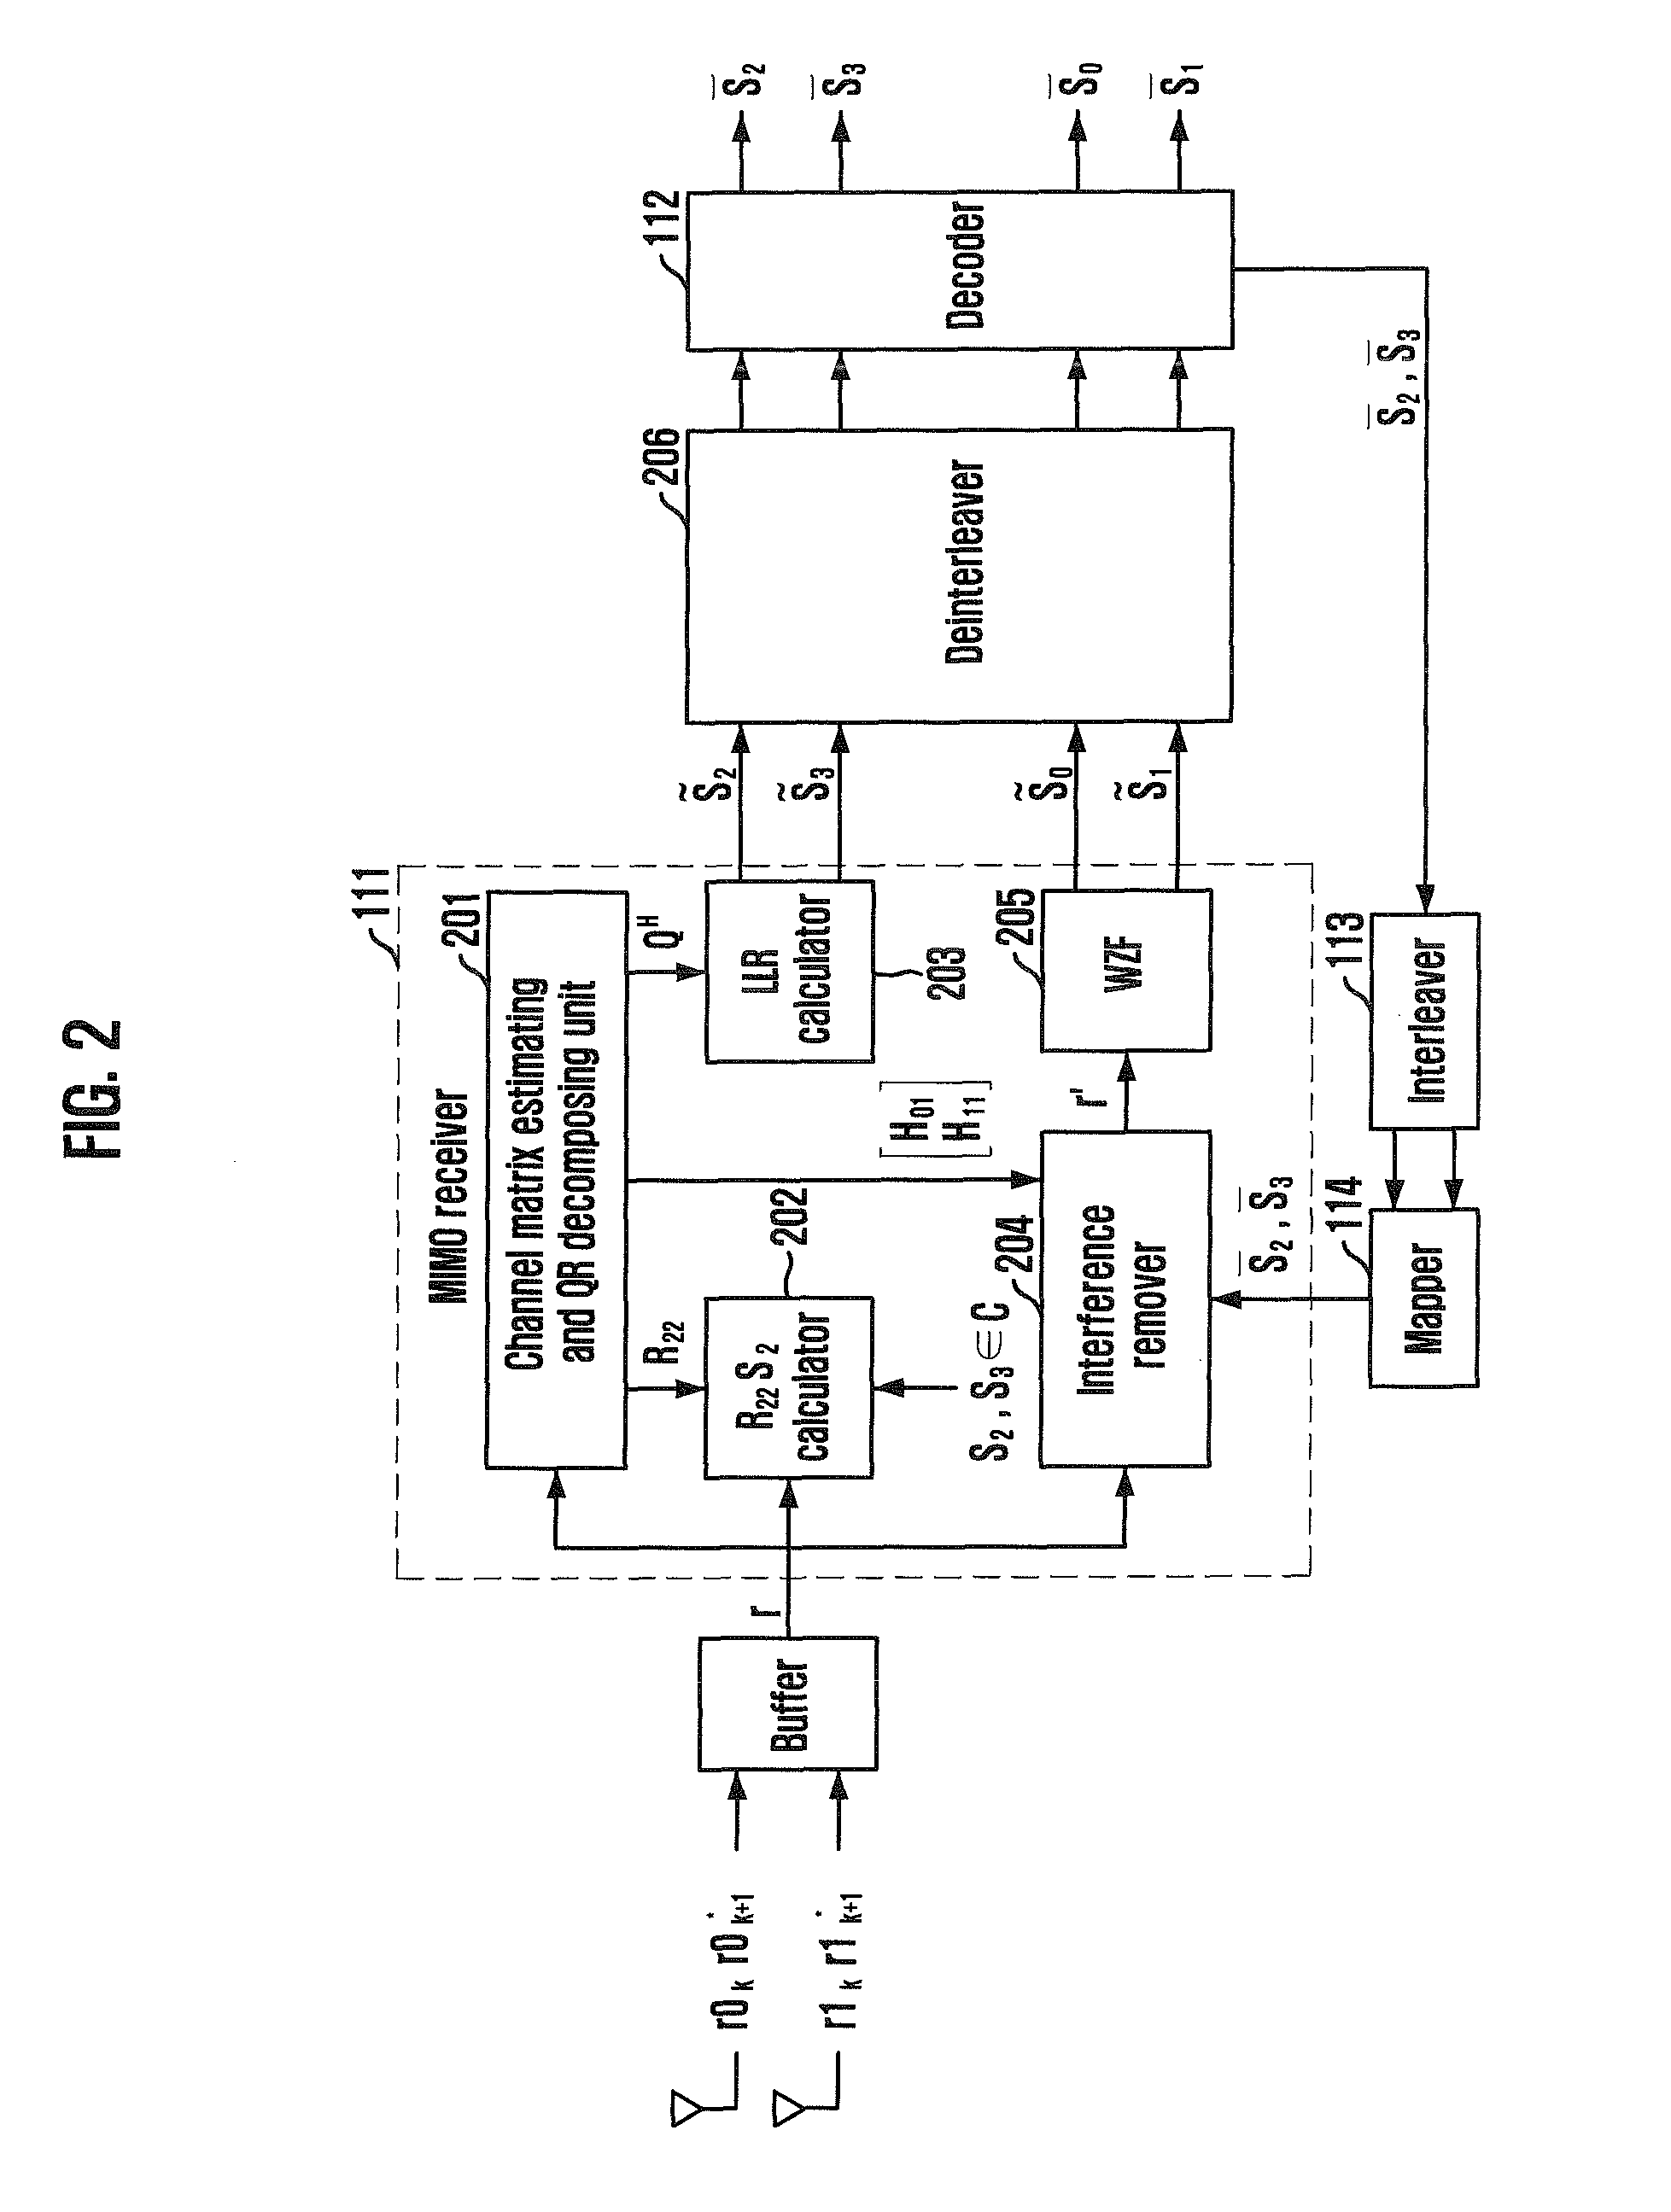 Receiving apparatus and method for MIMO system